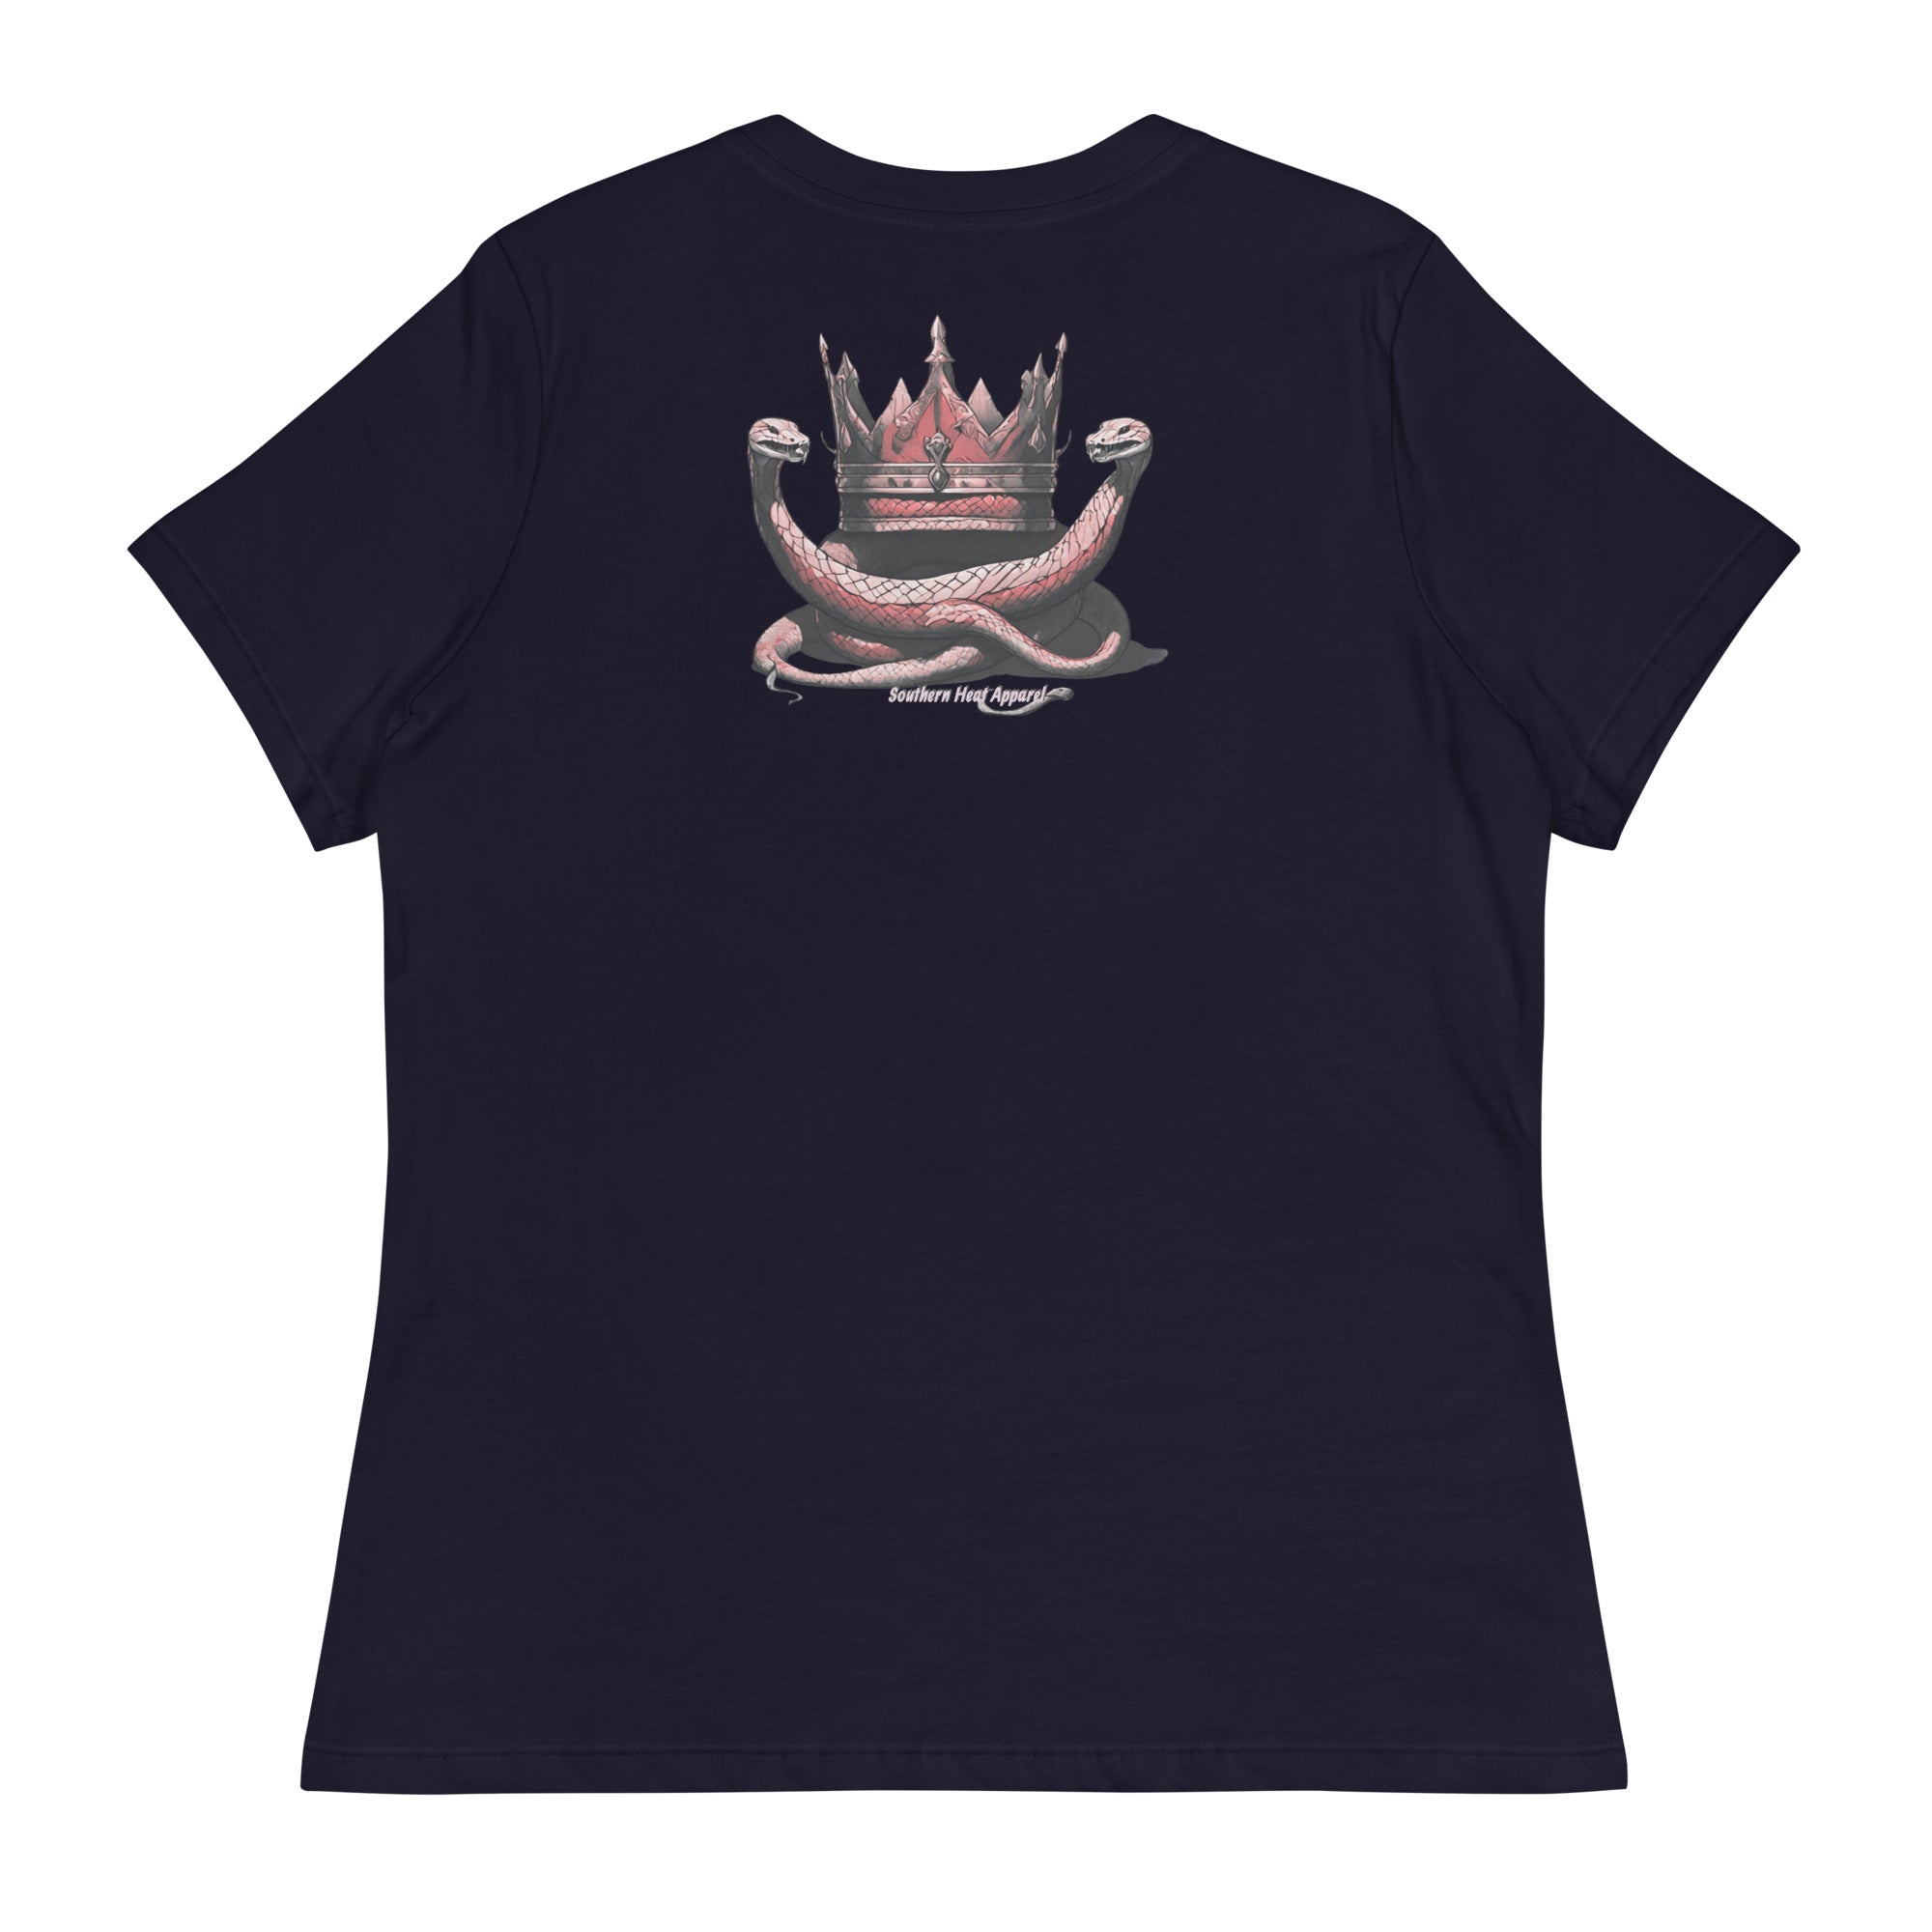 Crowned-Women's Relaxed T-Shirt